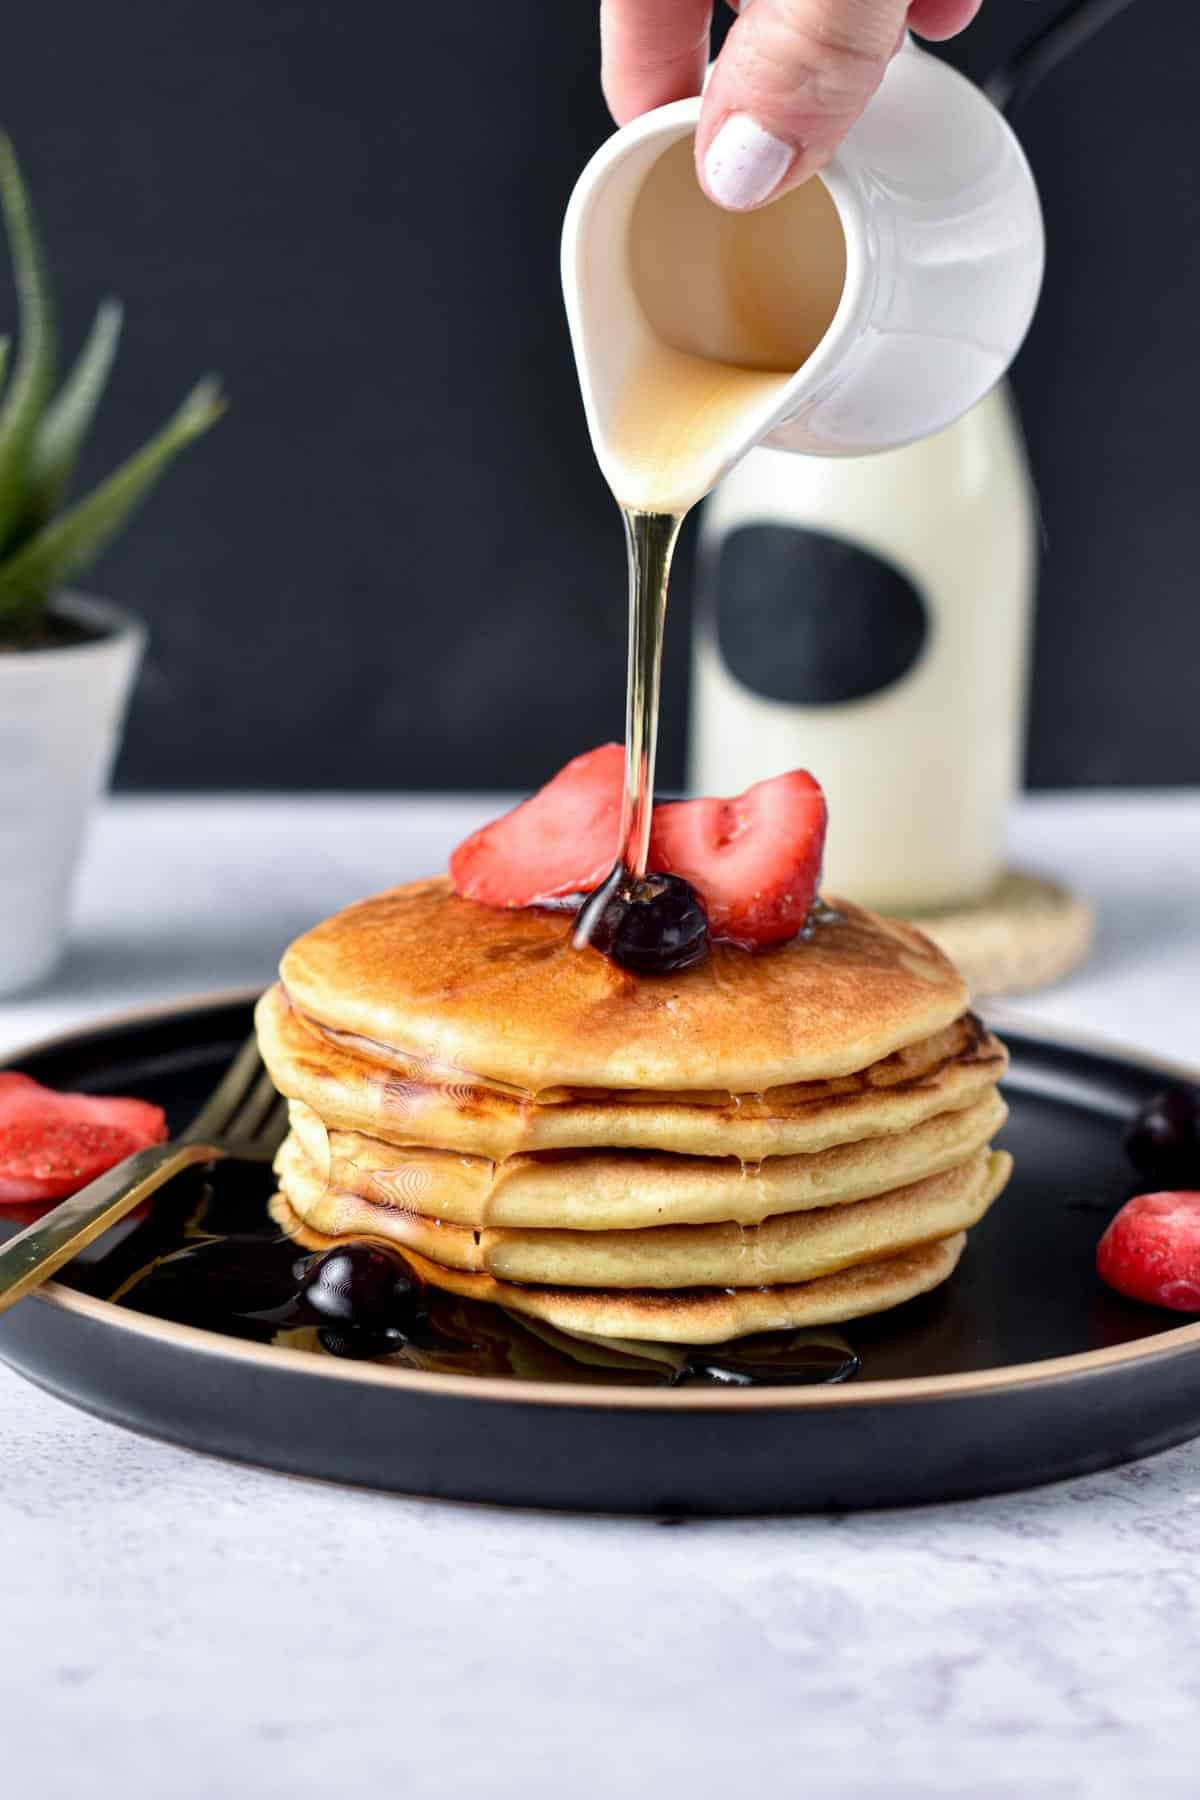 Pouring maple syrup on Paleo Pancakes decorated with strawberries and blueberries on a black plate.